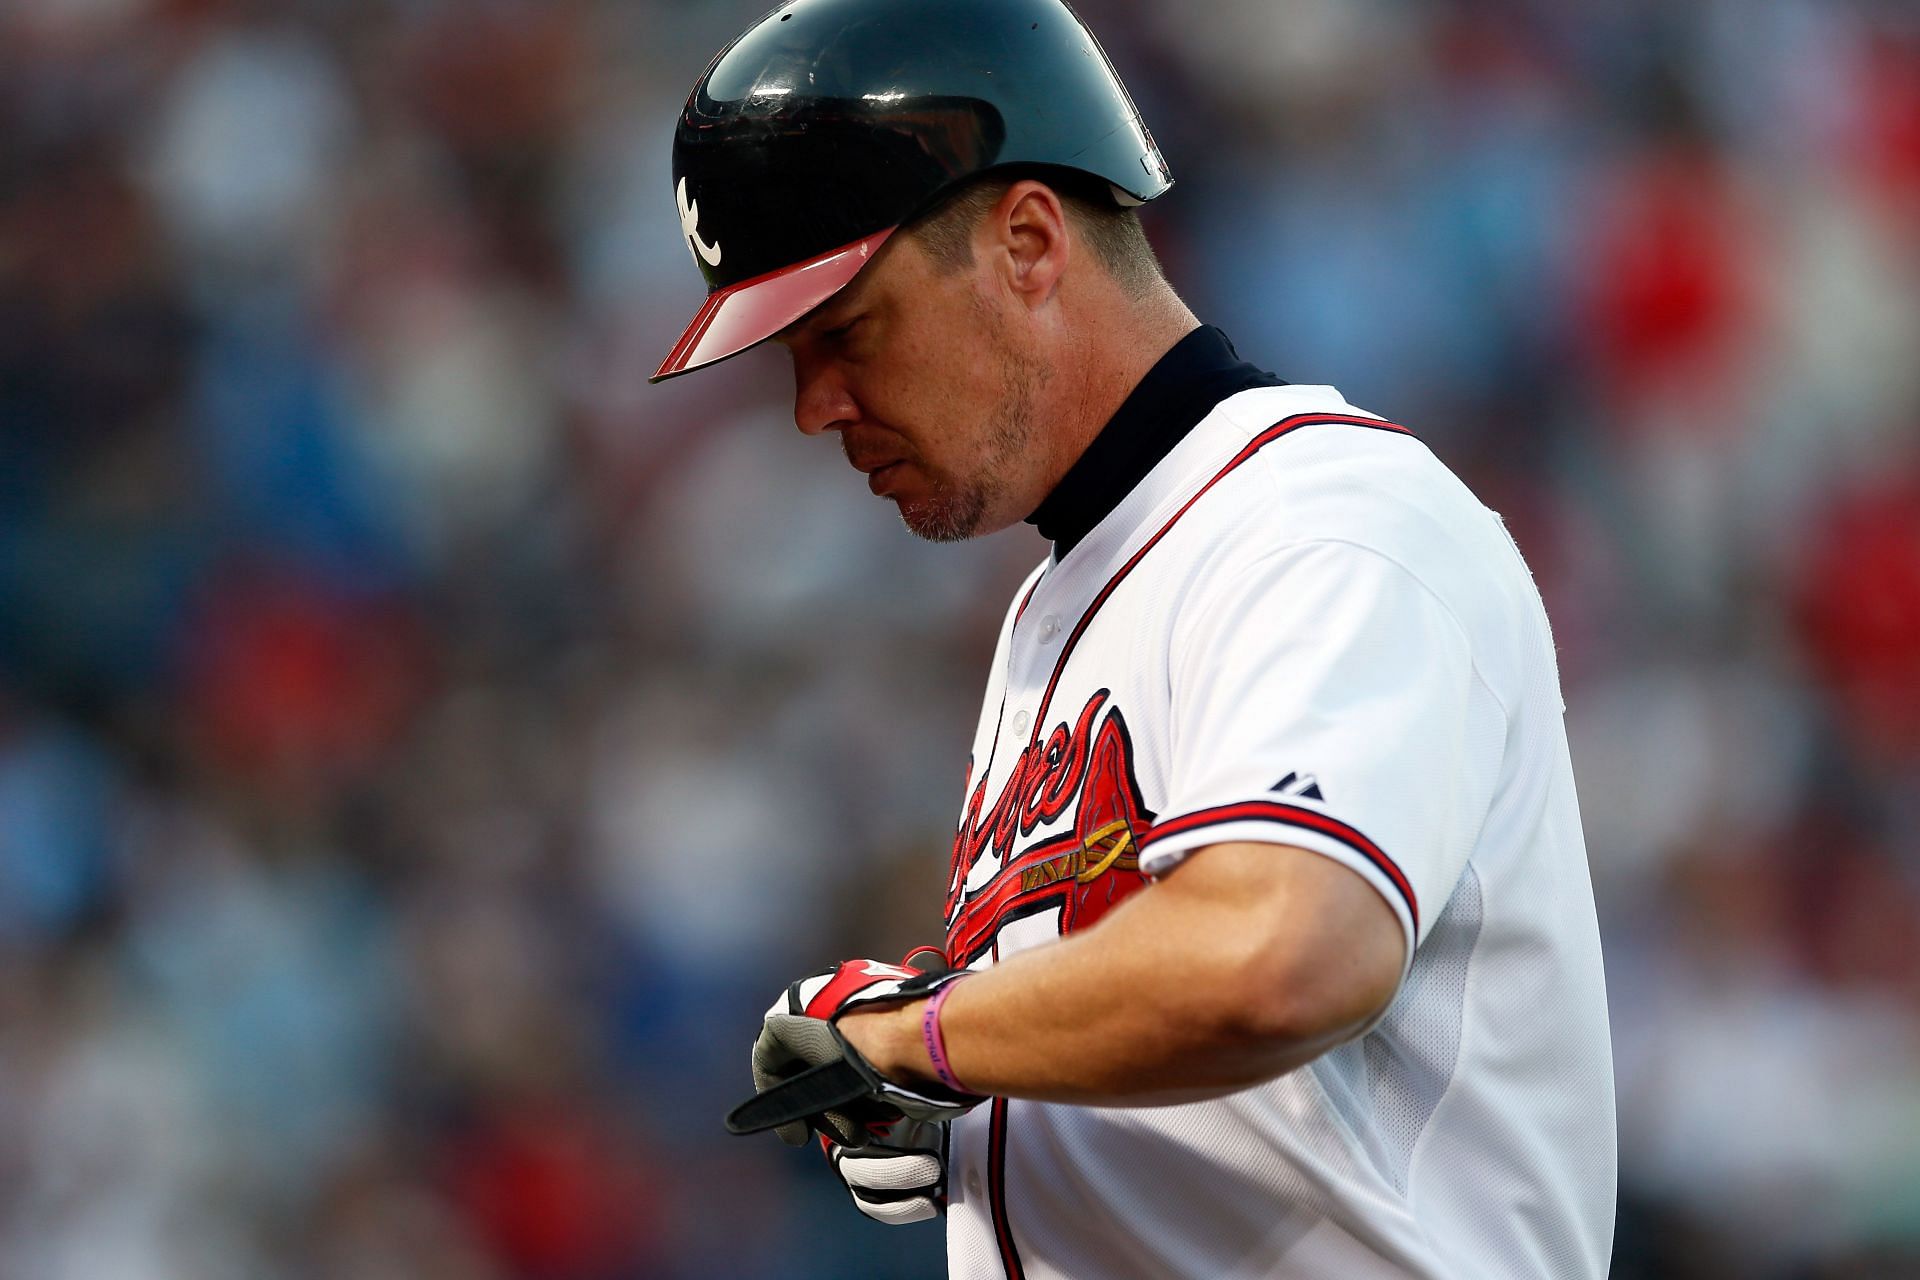 Chipper Jones #10 of the Atlanta Braves walks back to the dugout after flying out in the sixth inning against the St. Louis Cardinals during the National League Wild Card playoff game at Turner Field on October 5, 2012 in Atlanta, Georgia. (Photo by Kevin C. Cox/Getty Images)